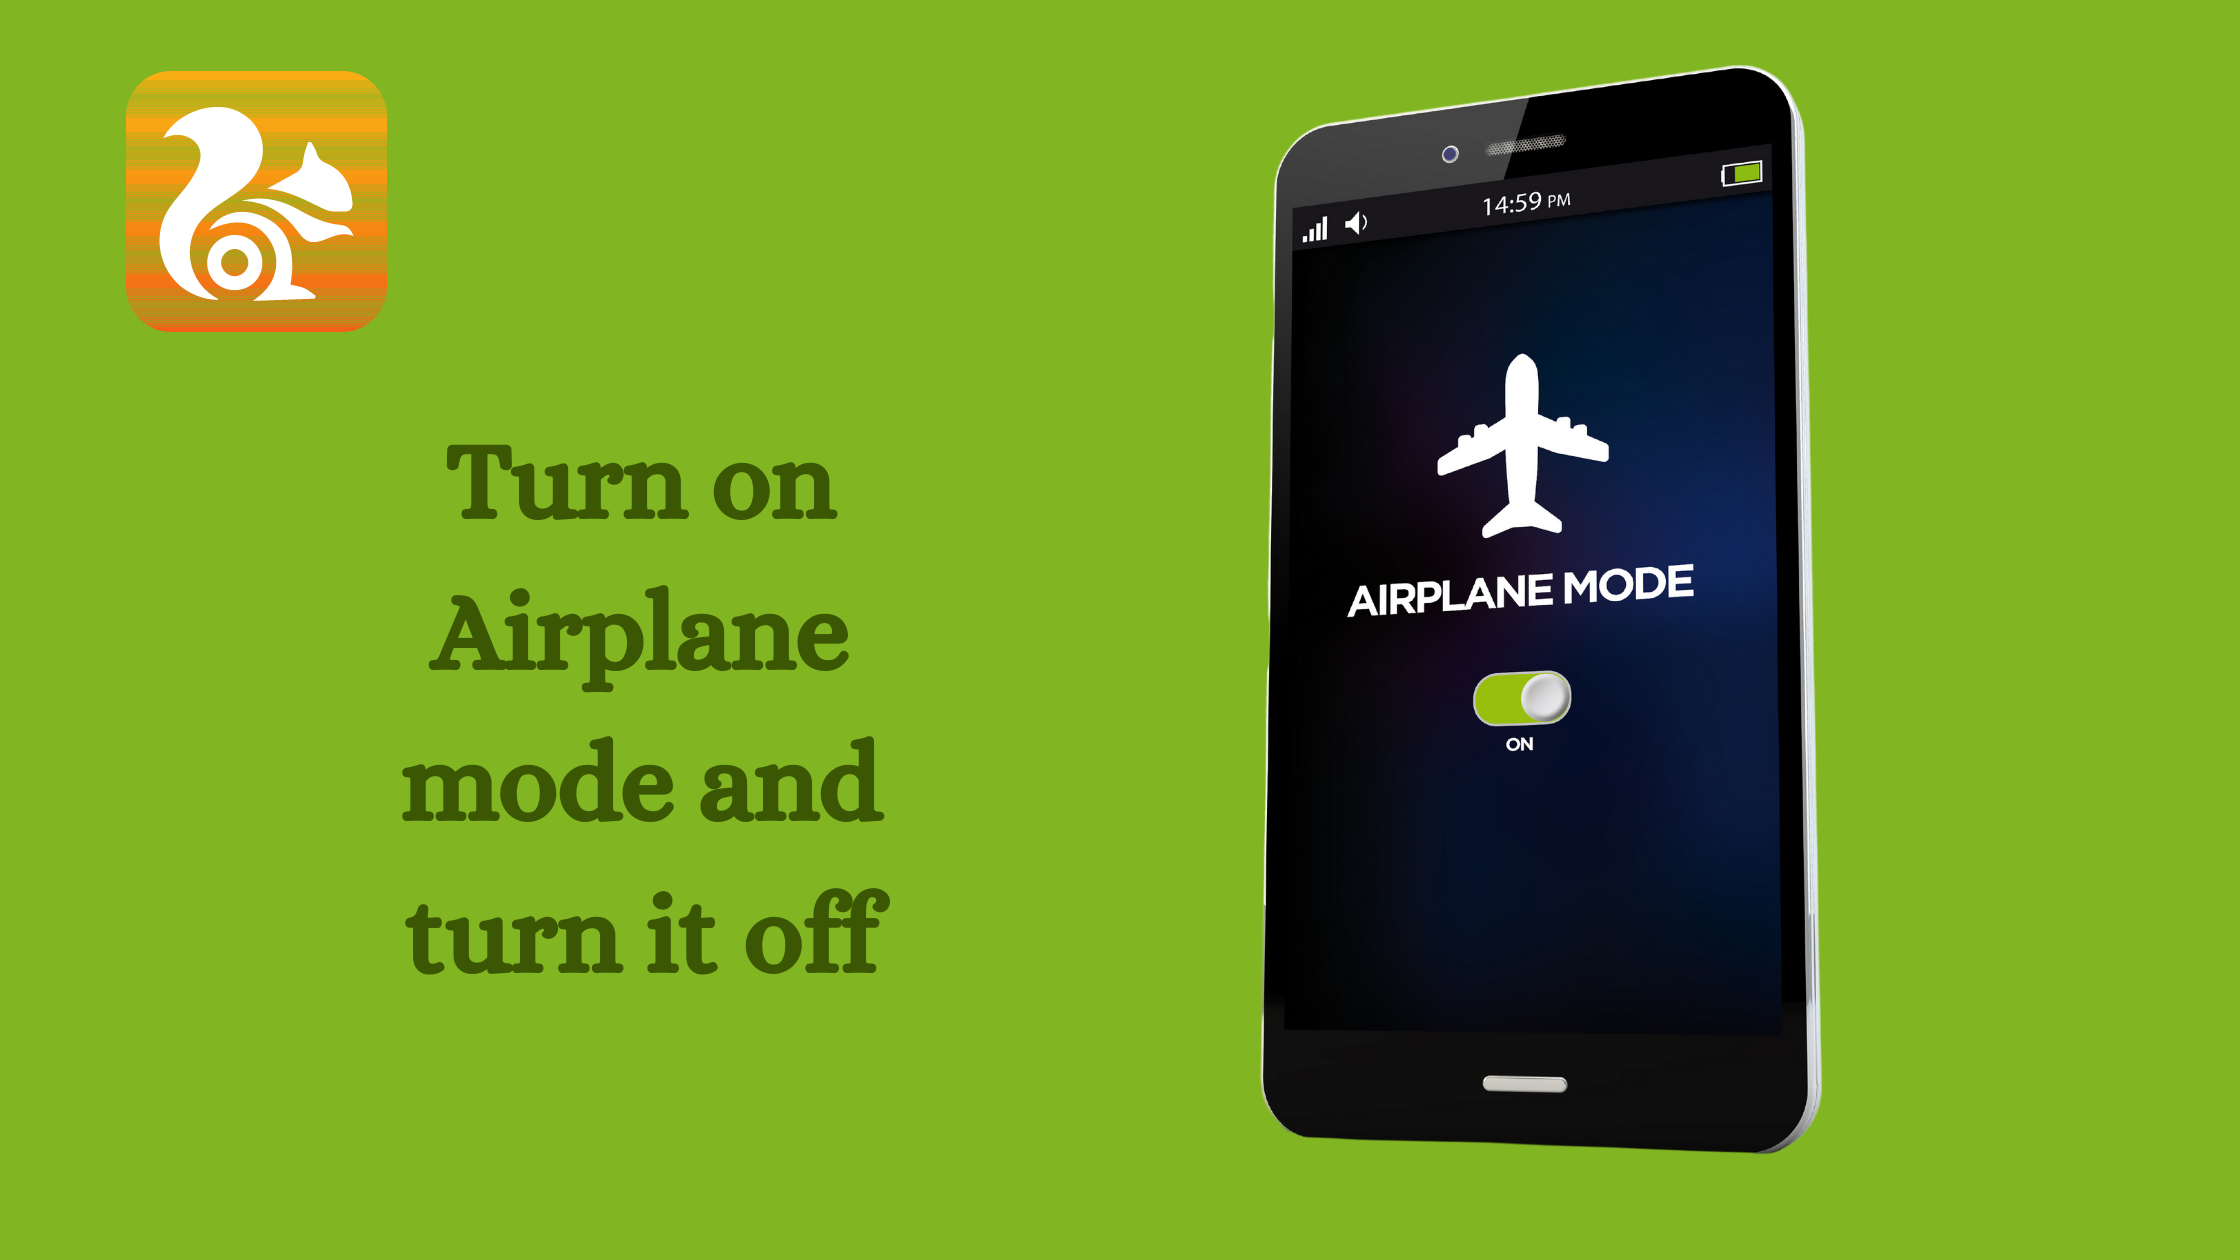 Turn on Airplane mode and turn it off